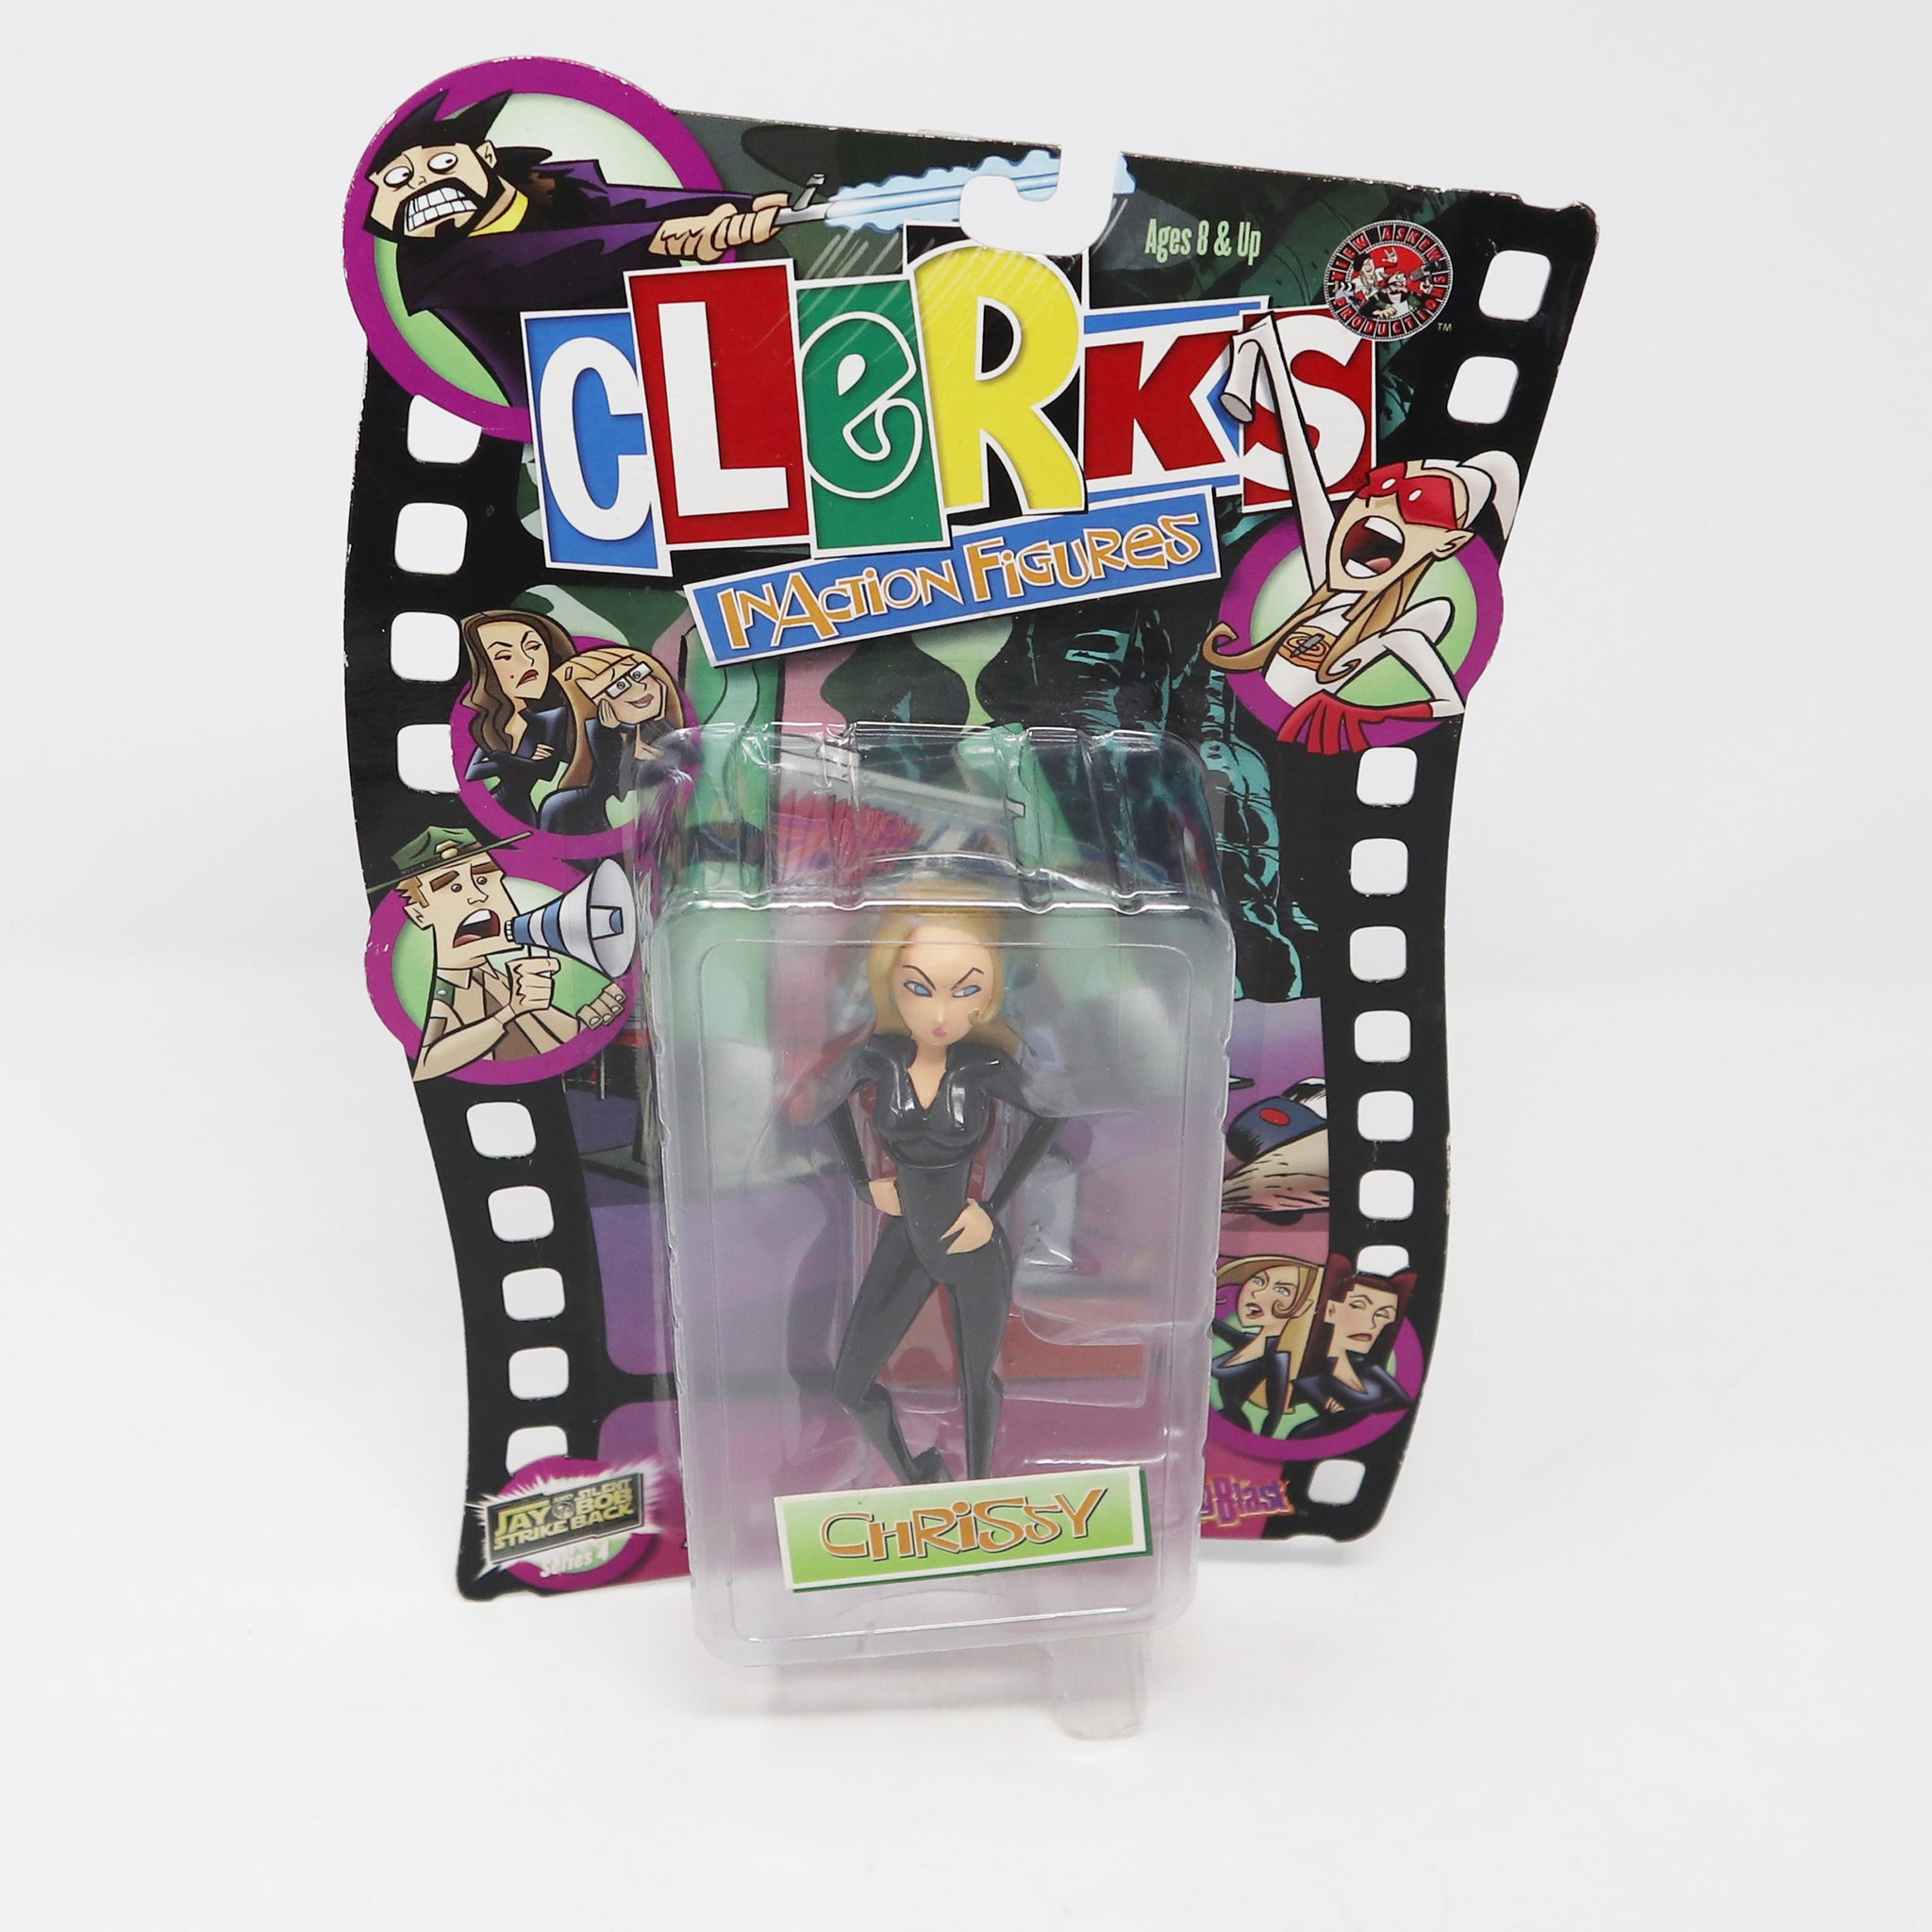 2005 Big Blast Graphitti Designs Clerks In Action Figures Jay And Silent Bob Strike Back Series 4 Chrissy Action Figure Carded MOC